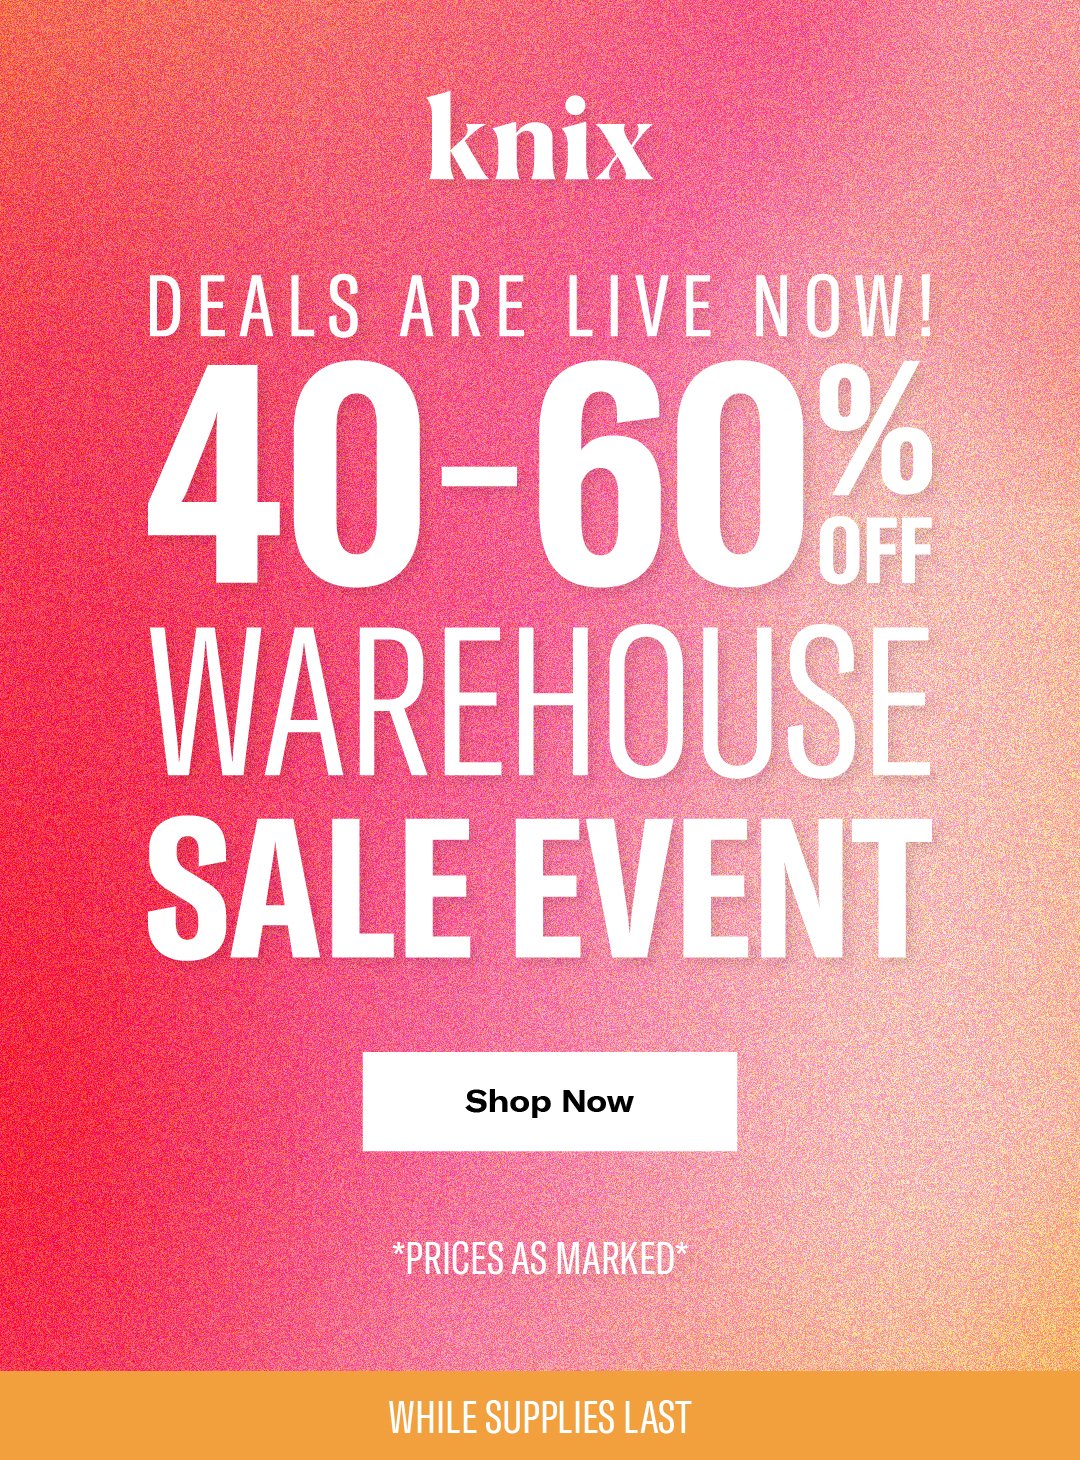 Knix CA: WAREHOUSE SALE IS COMING